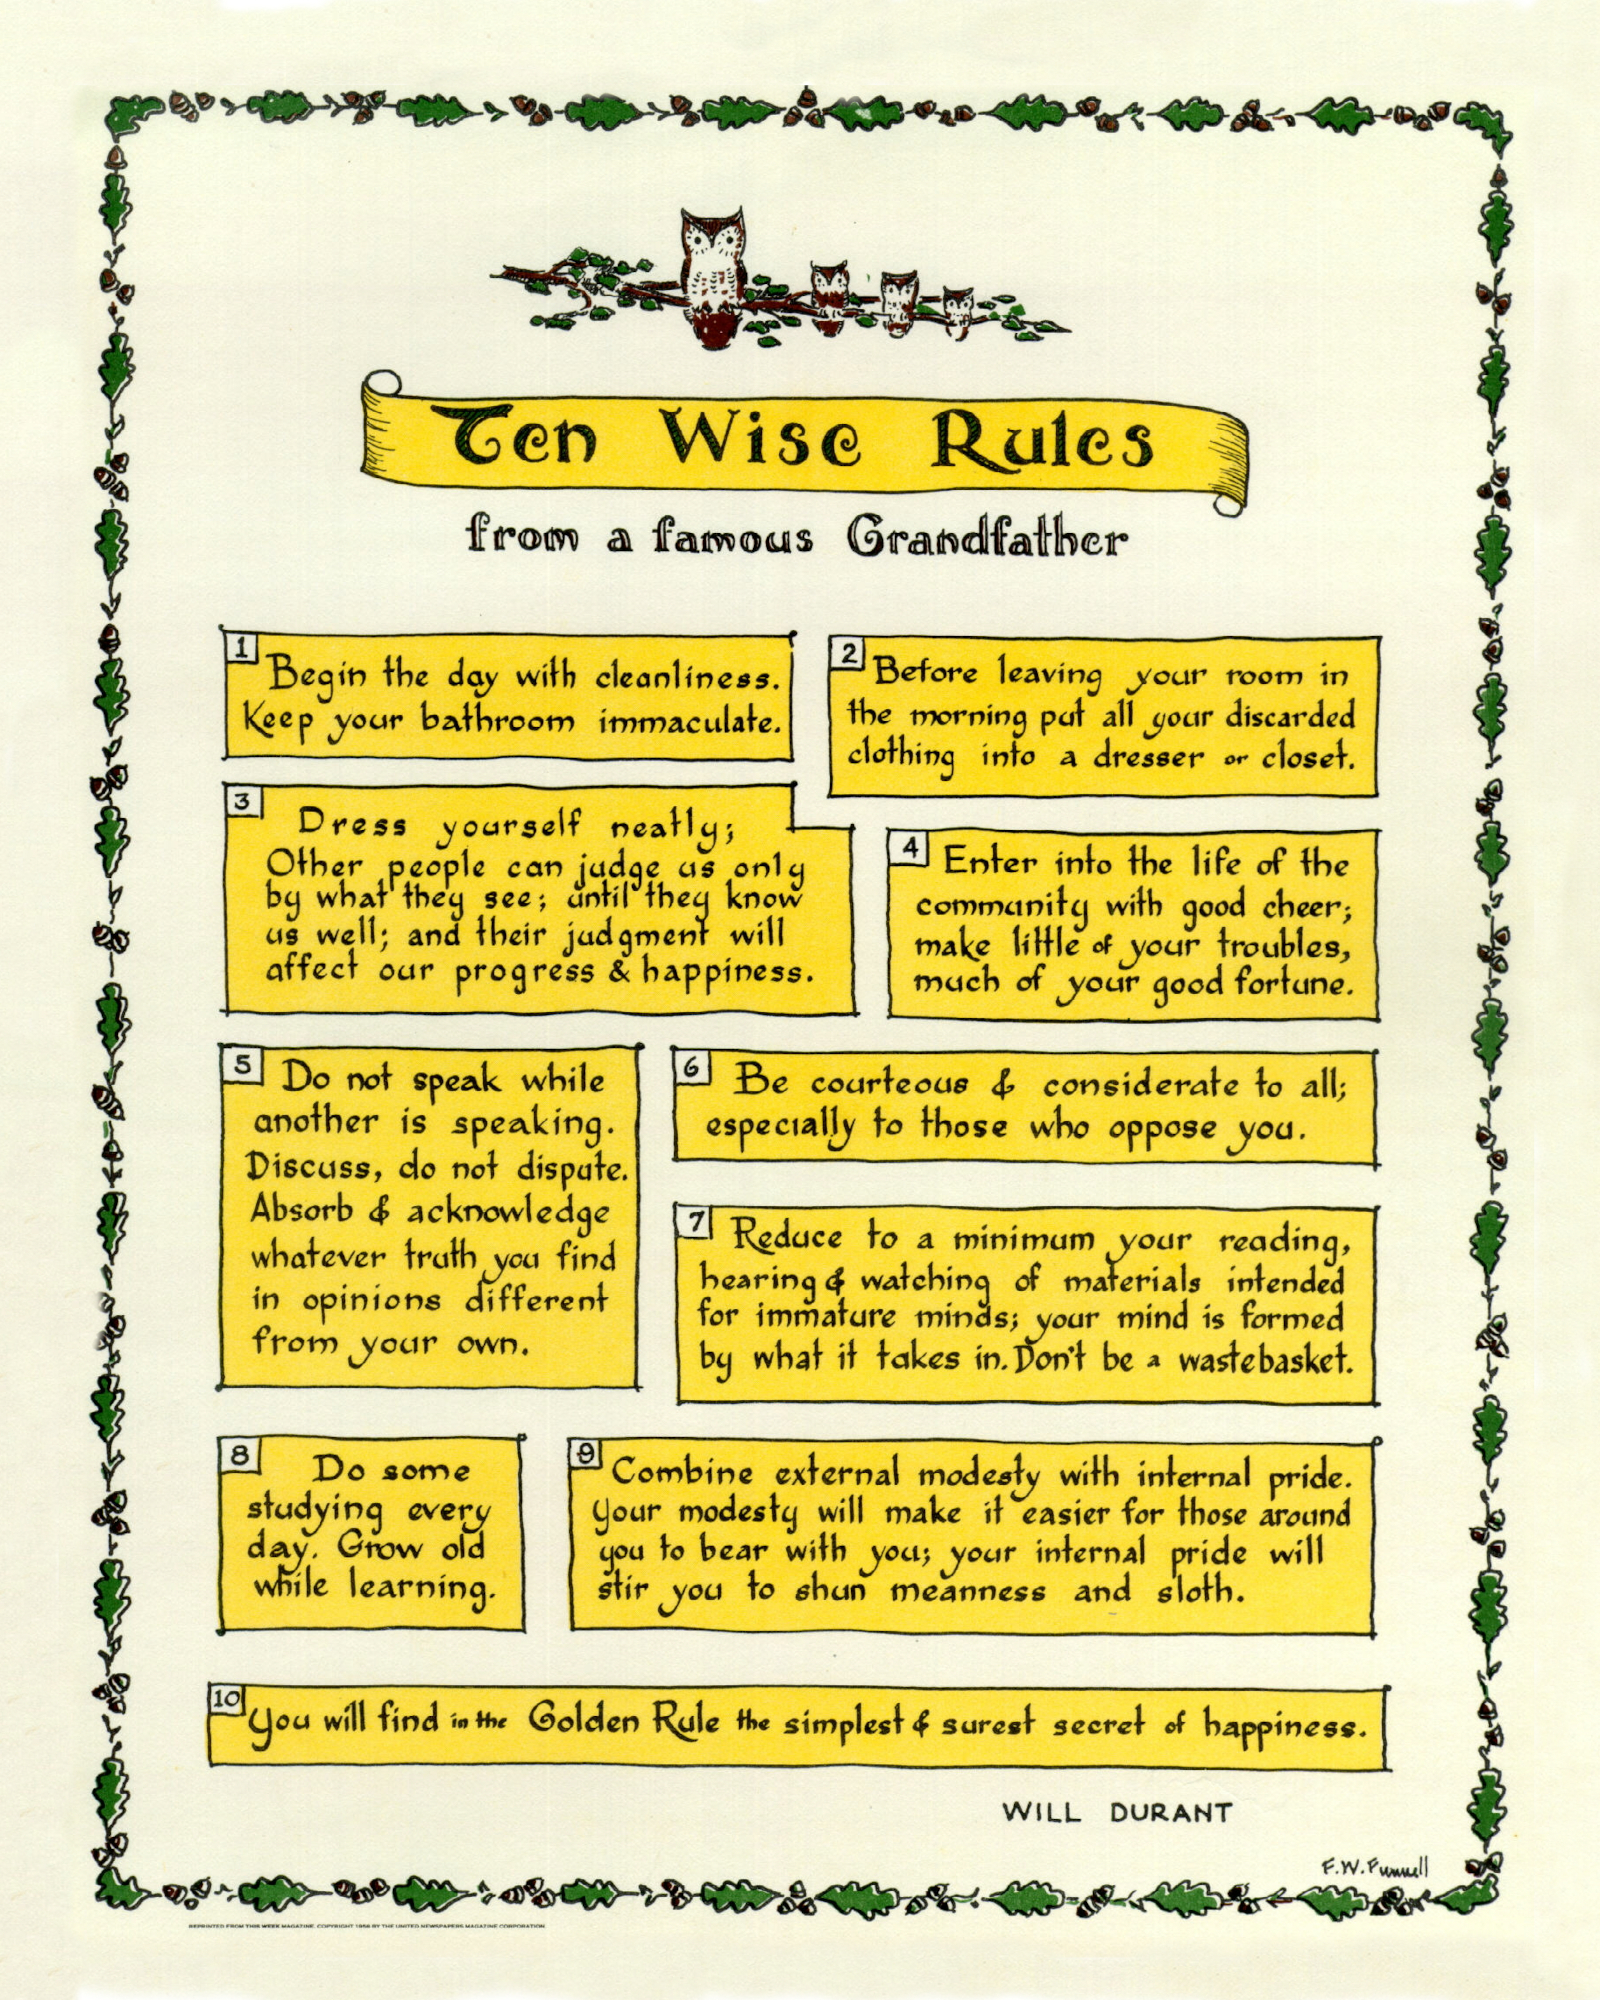 Ten Wise Rules, by Will Durant